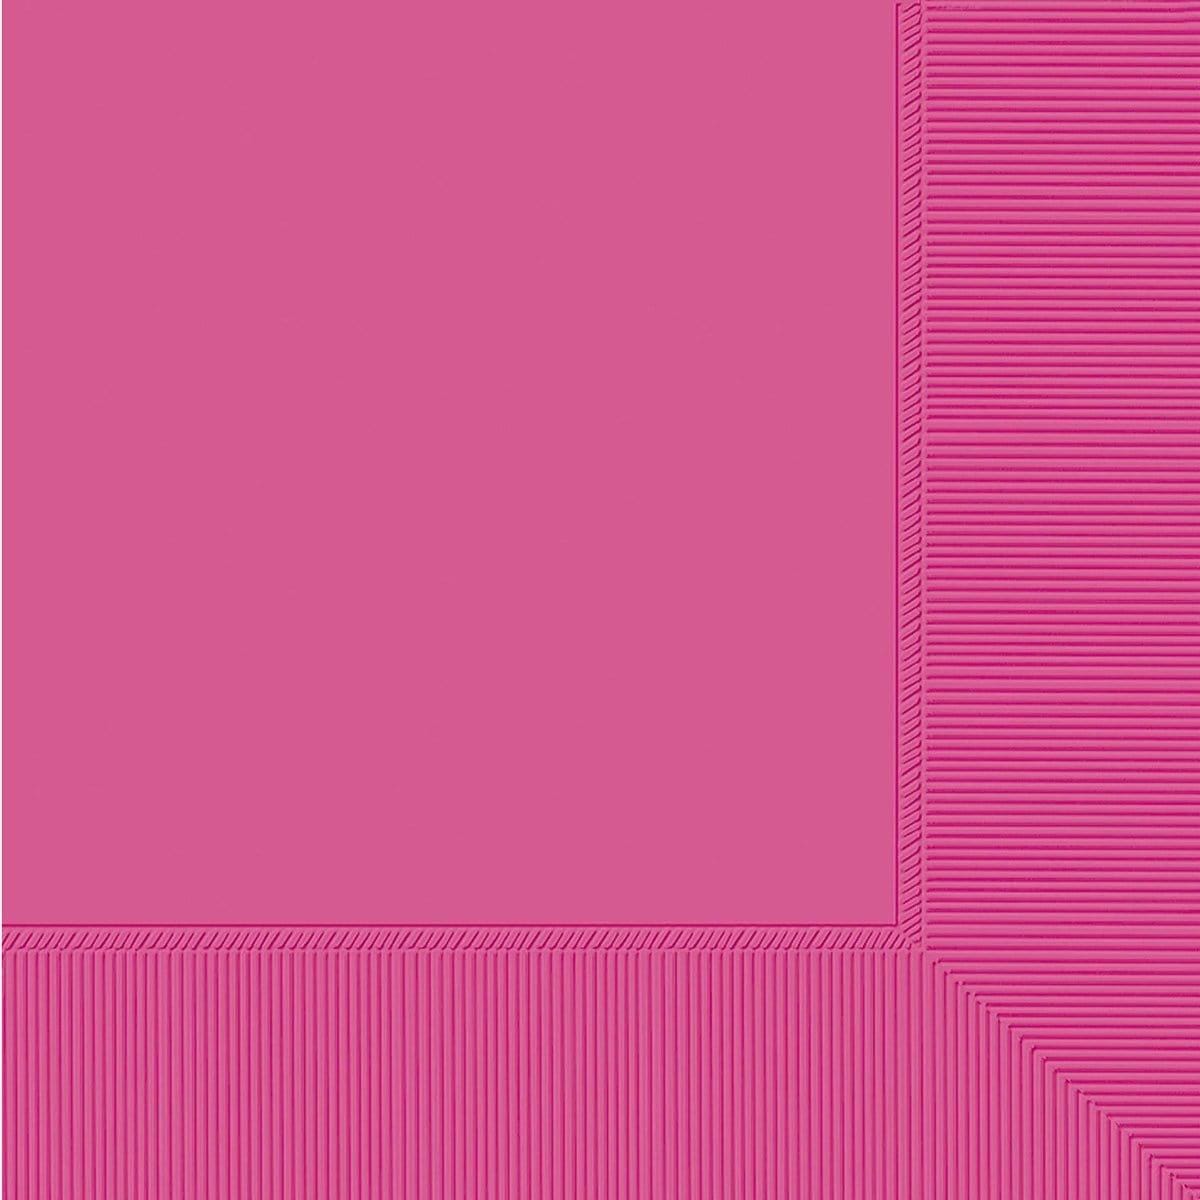 Buy Plasticware Bright Pink Dinner Napkins, 40 Count sold at Party Expert